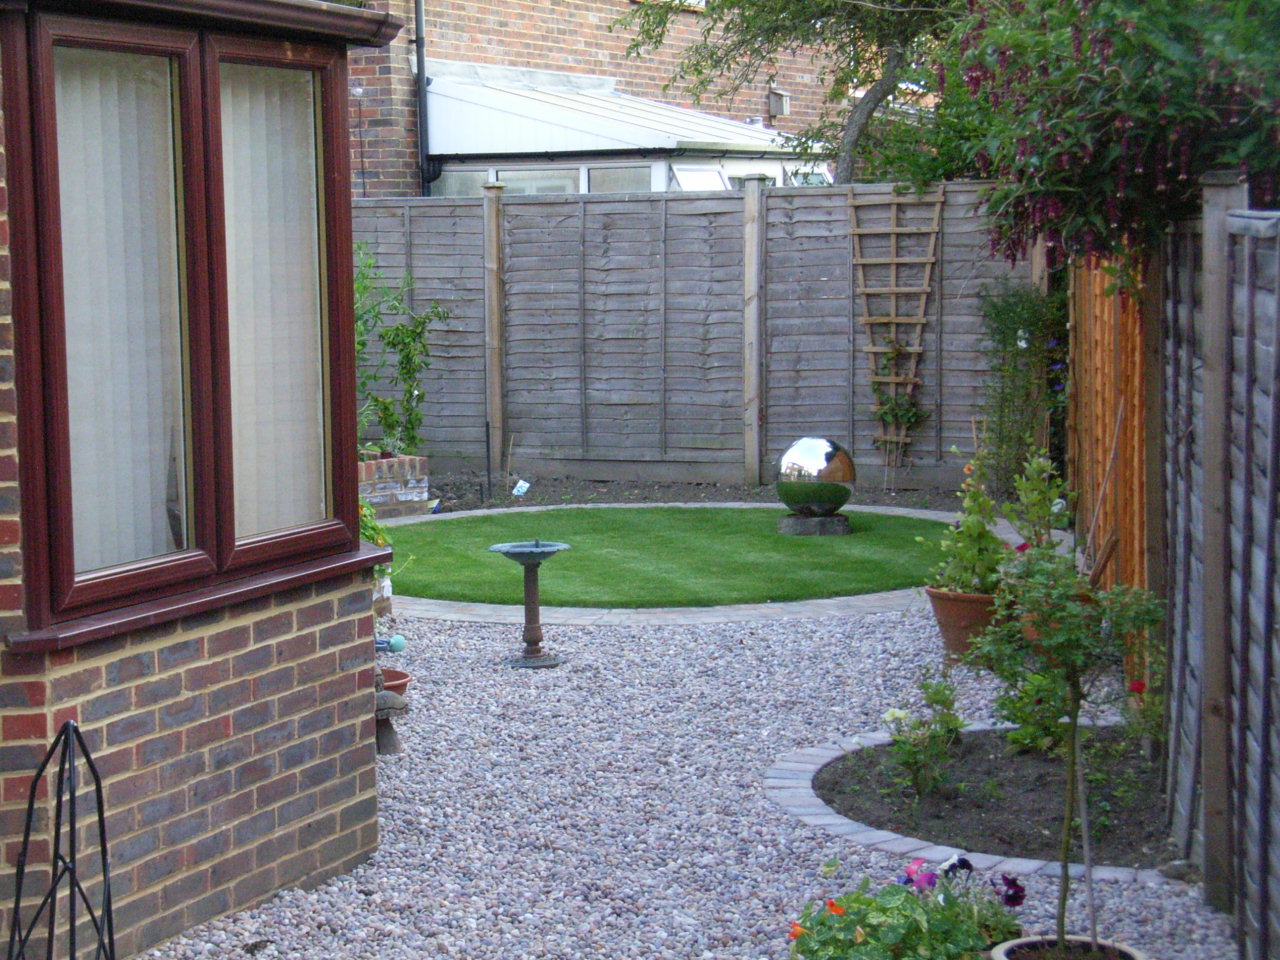 A small circular lawn and semi-circular beds, combined with Caledonian pebbles make this low maintenance garden stylish.